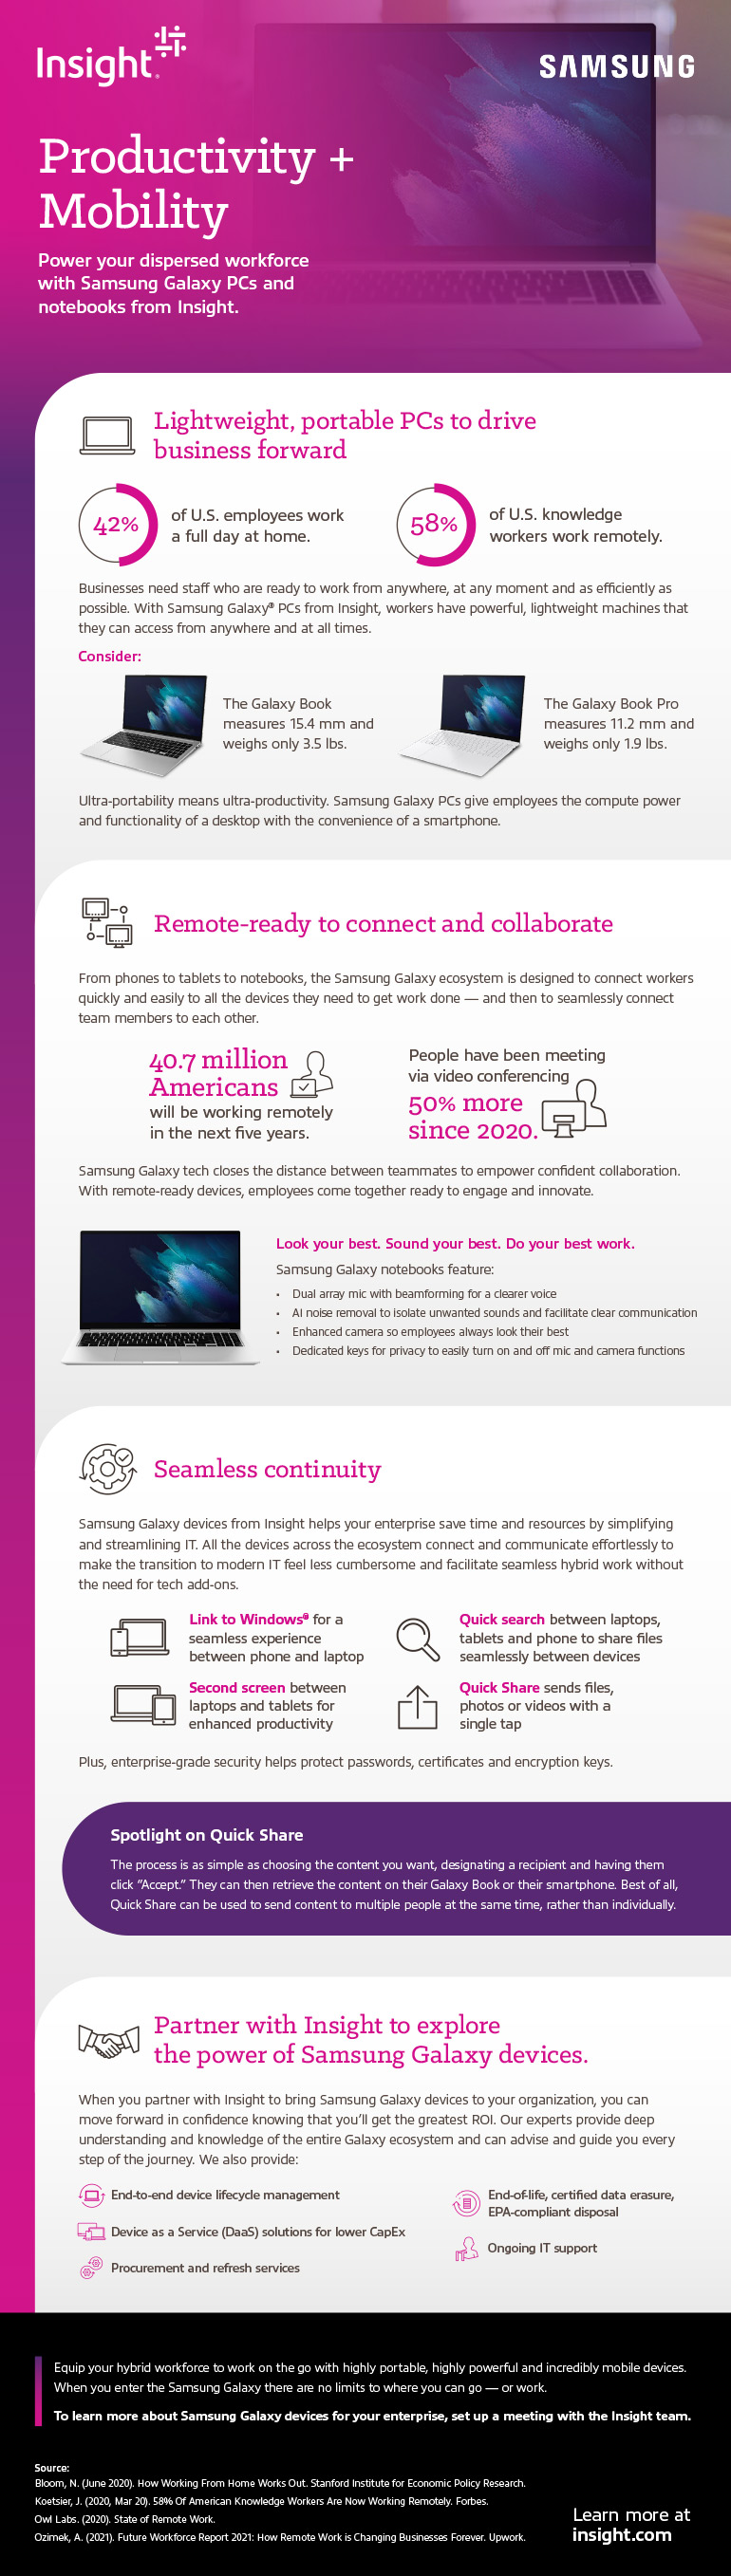 Samsung Productivity + Mobility infographic